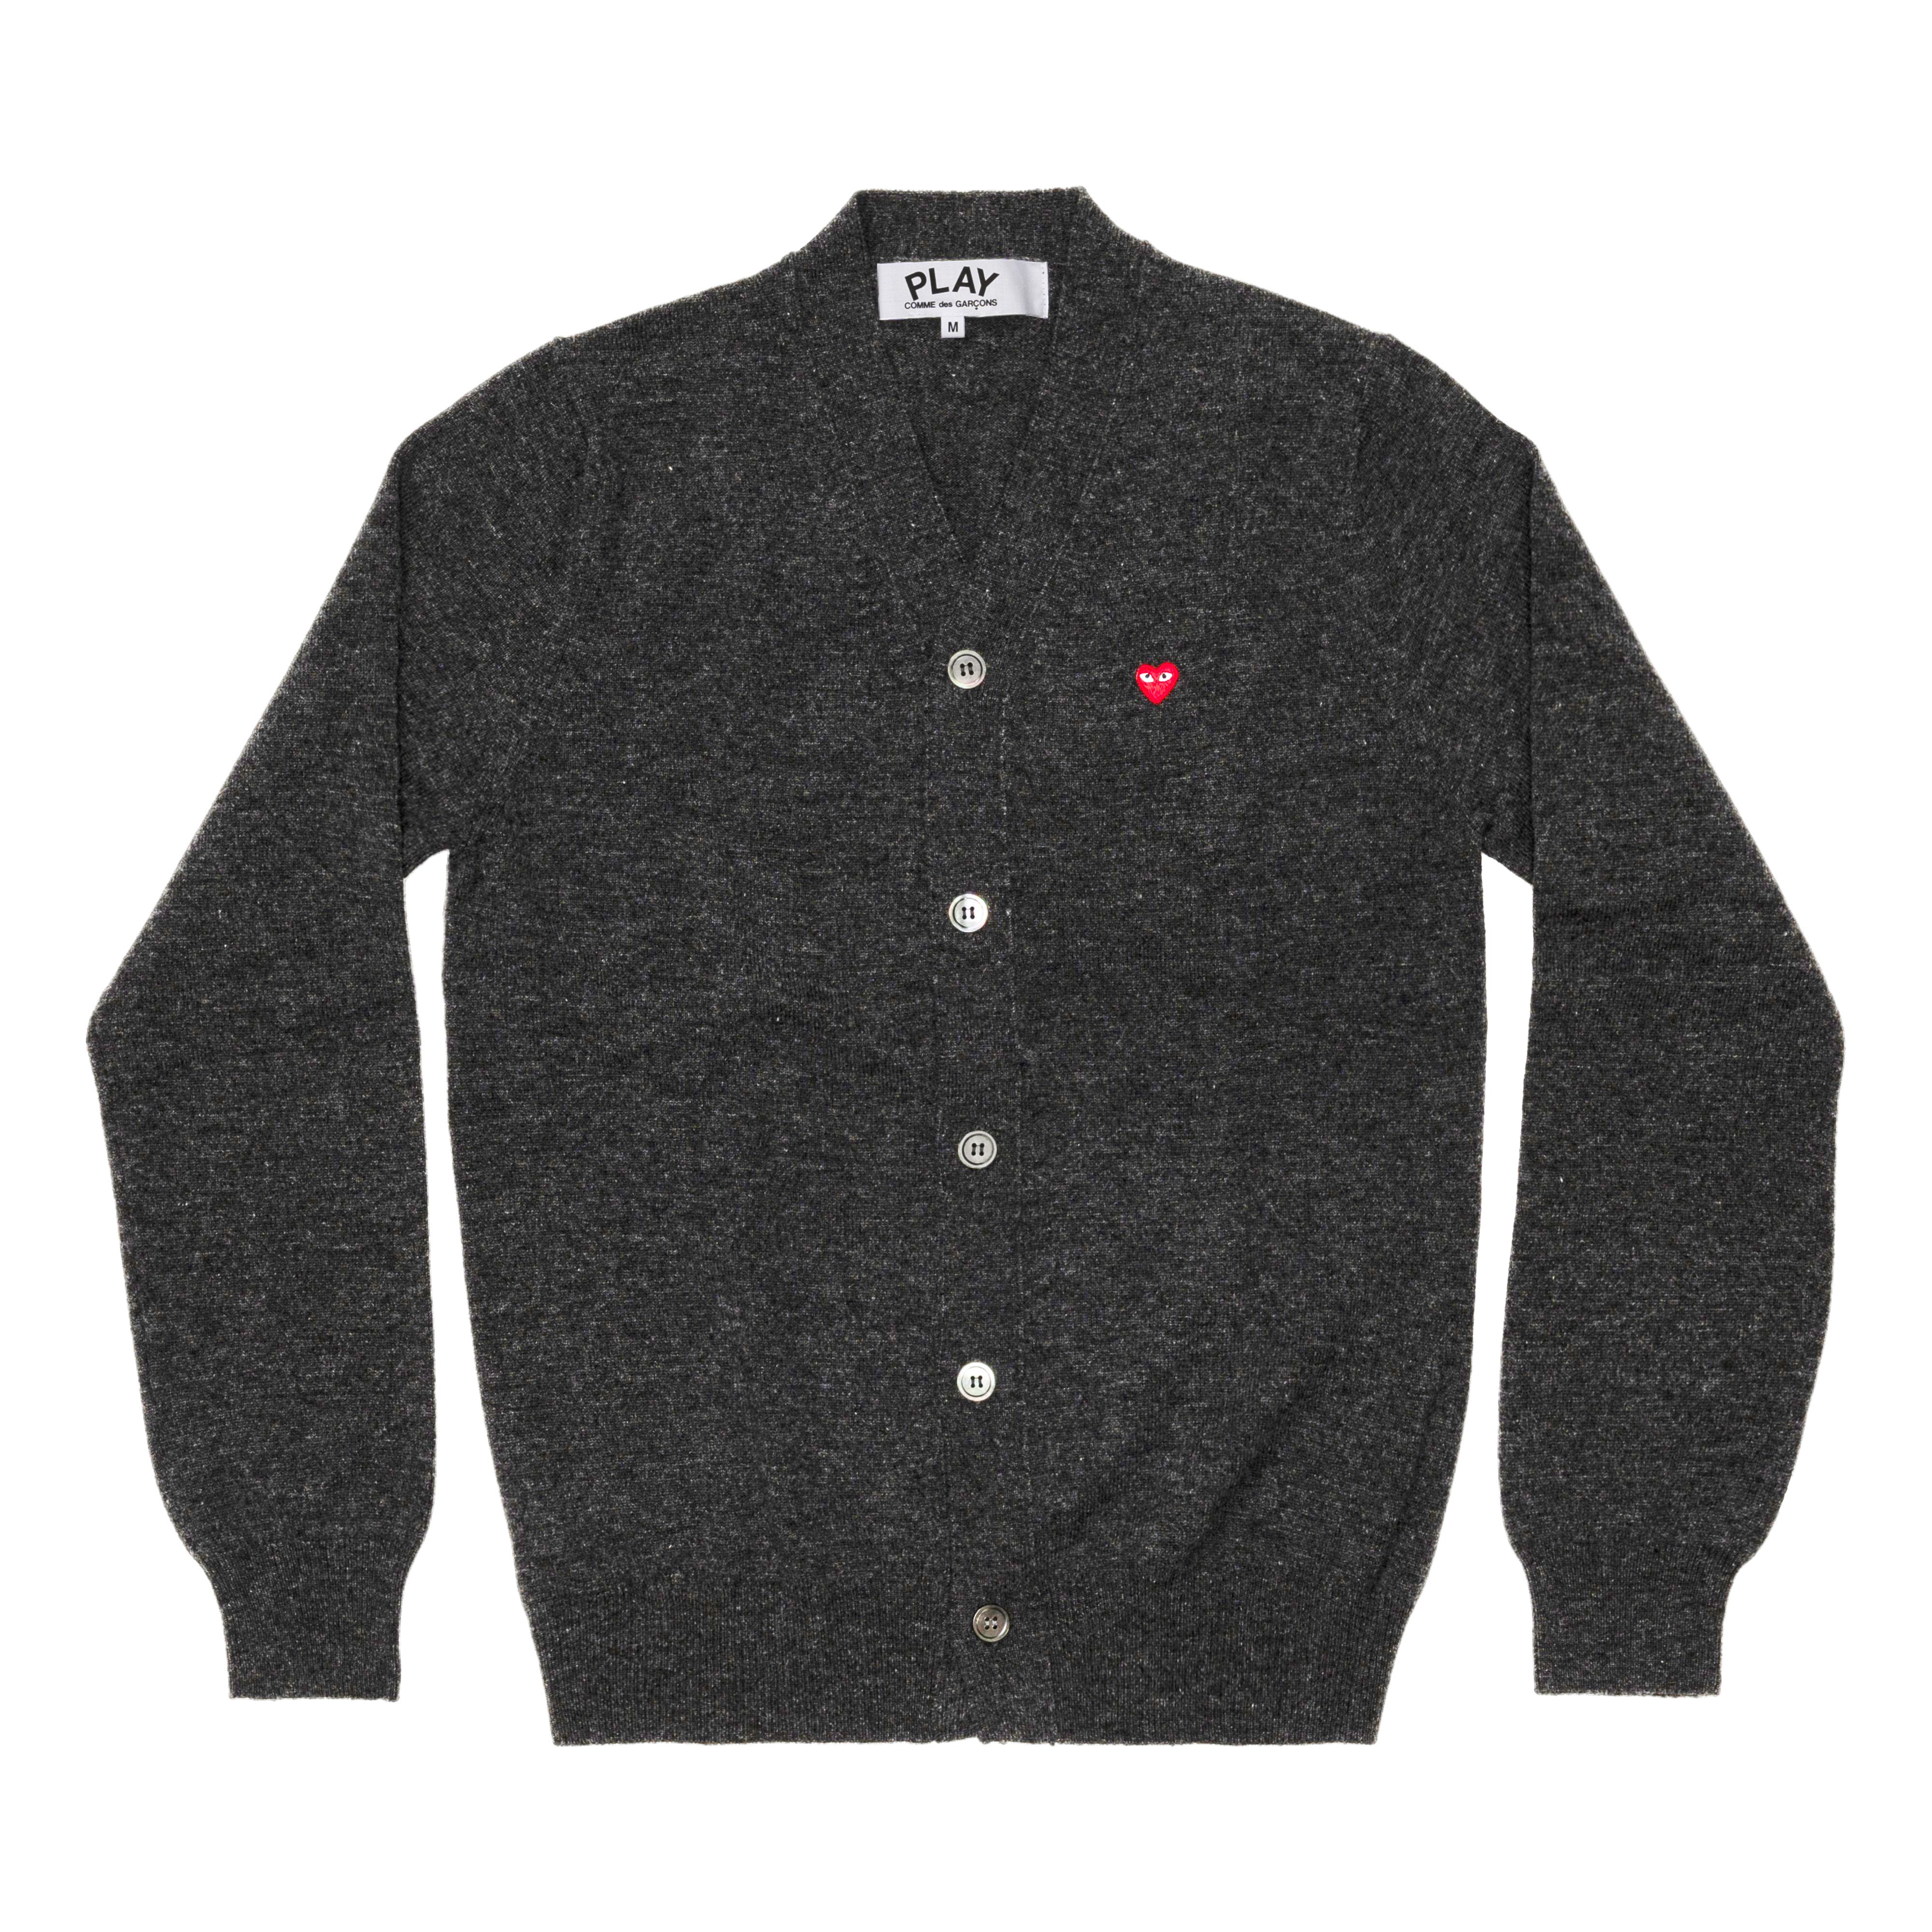 PLAY CDG - MEN'S CARDIGAN WITH SMALL RED HEART - (CHARCOAL GREY 